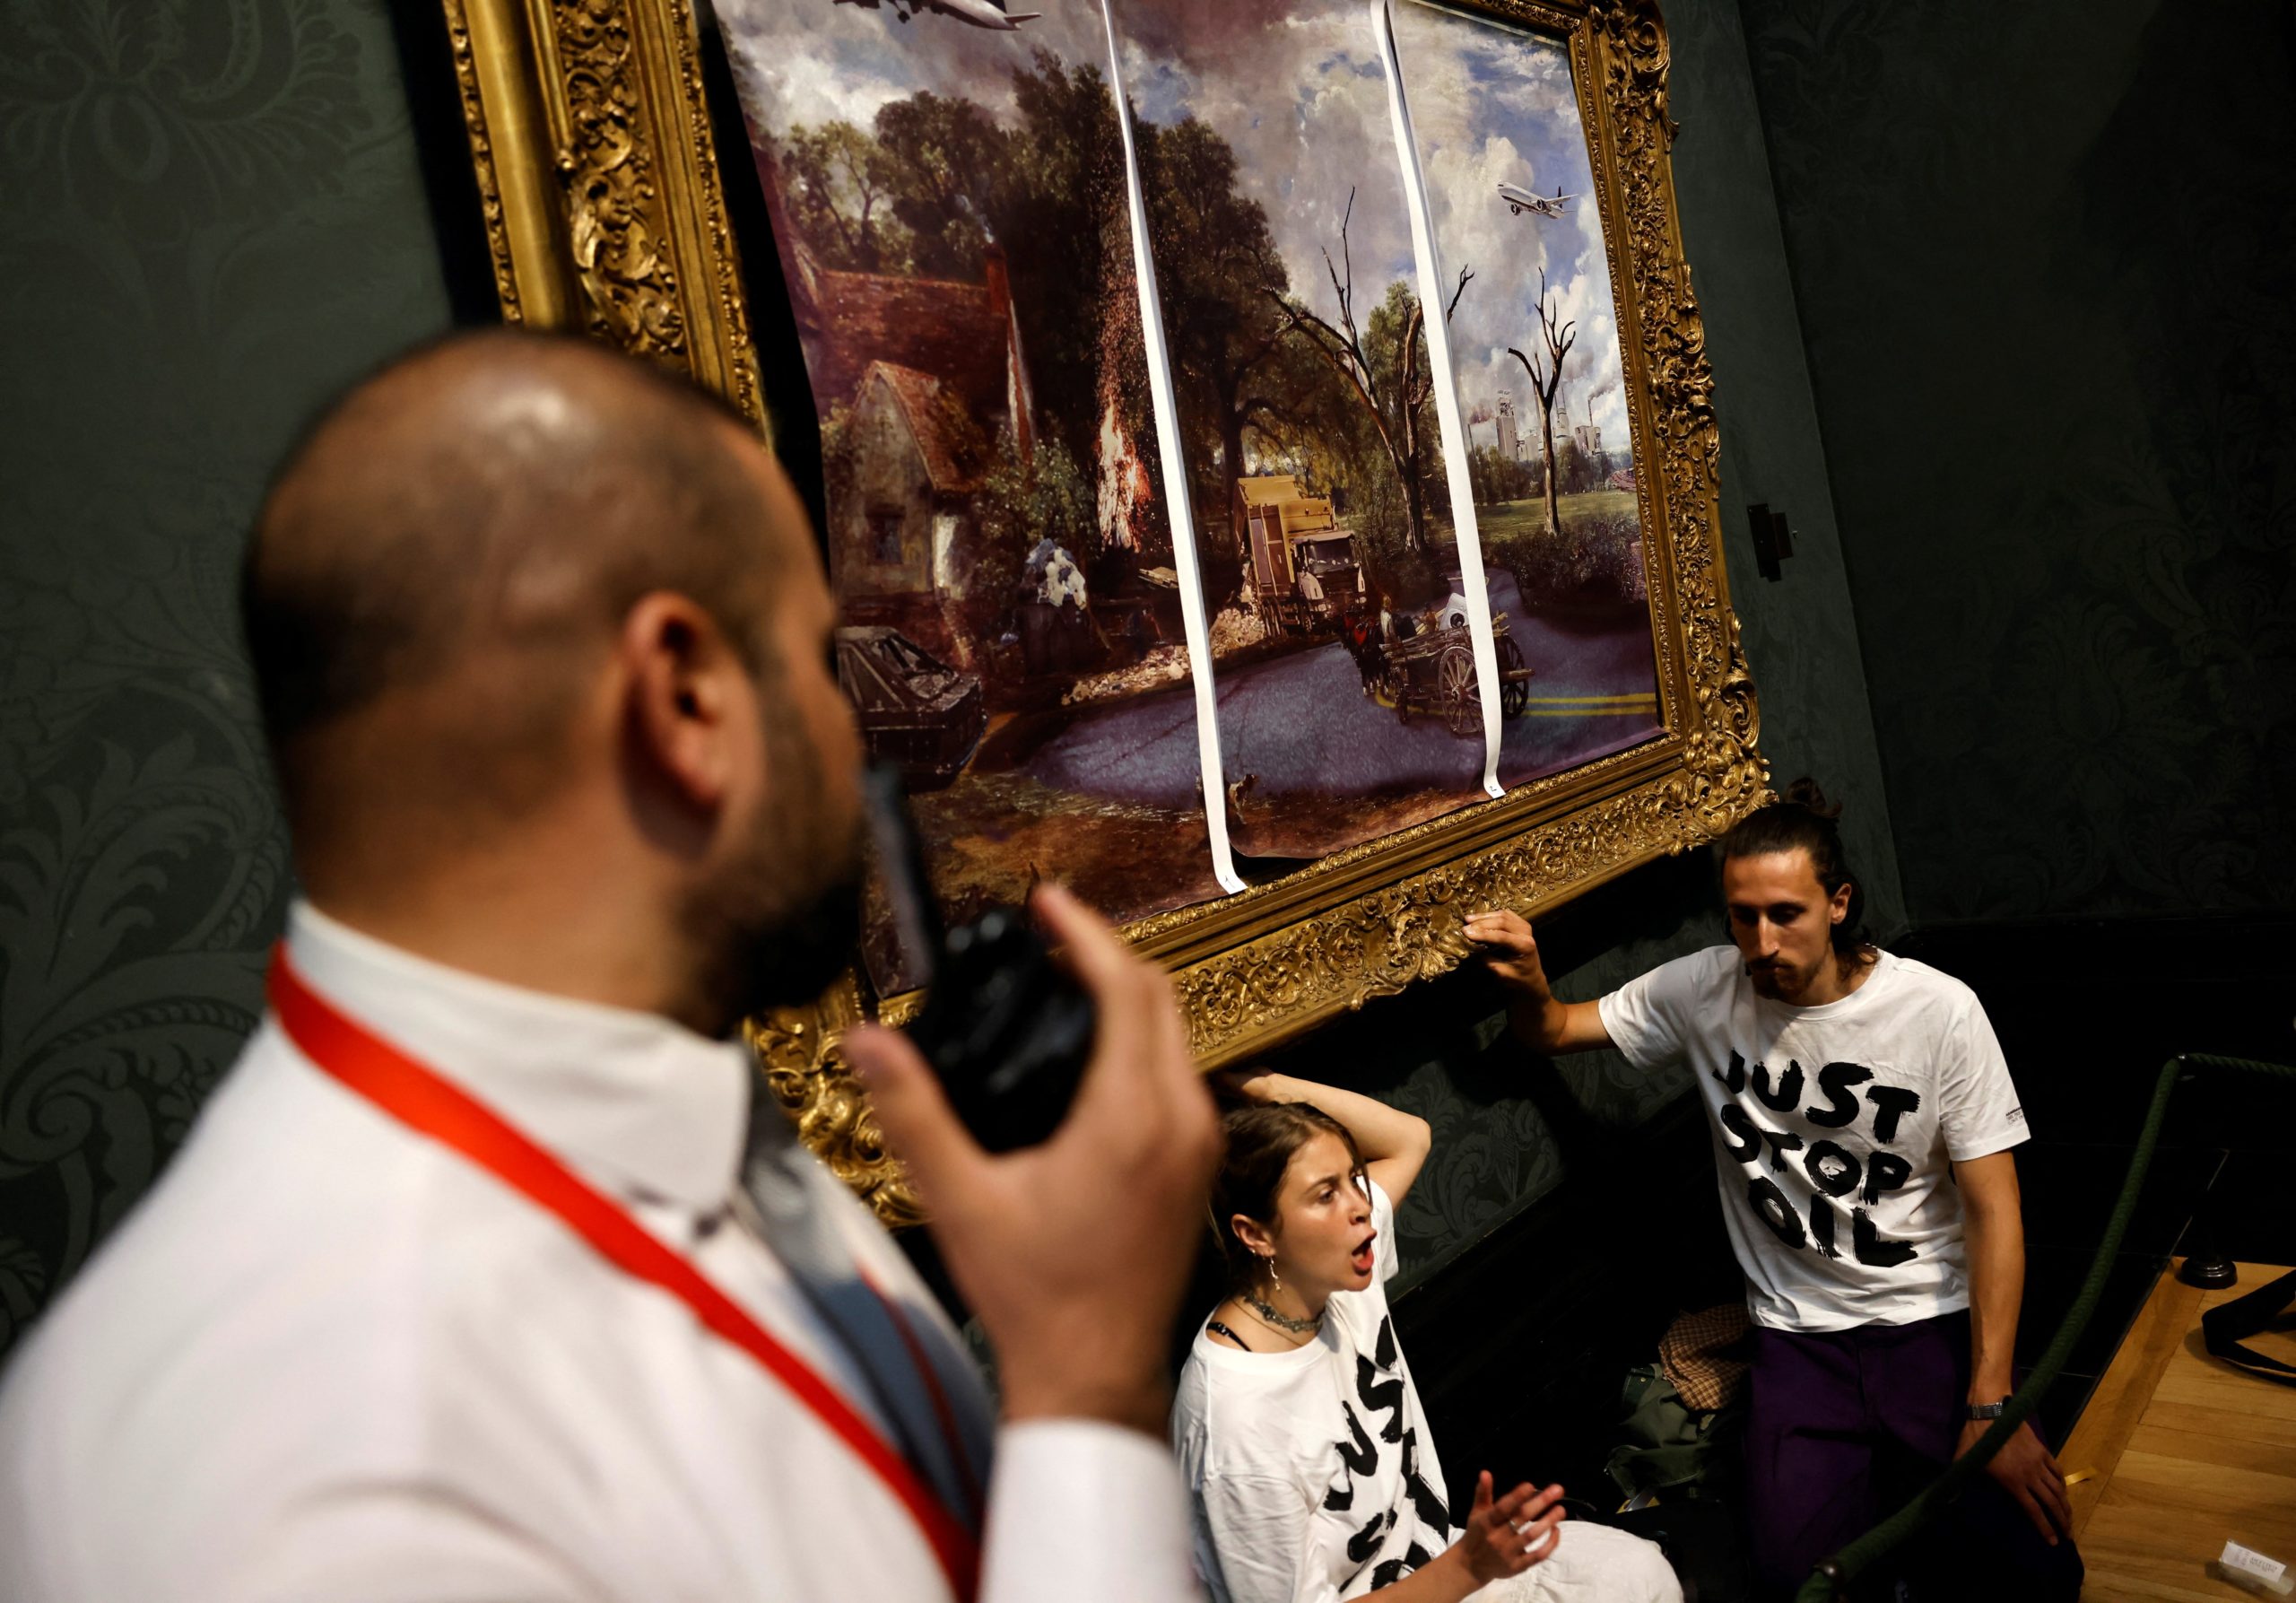 Activists from the 'Just Stop Oil' campaign group, with hands glued to the frame of the painting 'The Hay Wain' by English artist John Constable, but covered in a mock 'undated' version including roads and aircraft, protest against the use of fossil fuels, in the National Gallery in London on July 4, 2022. CARLOS JASSO/AFP via Getty Images